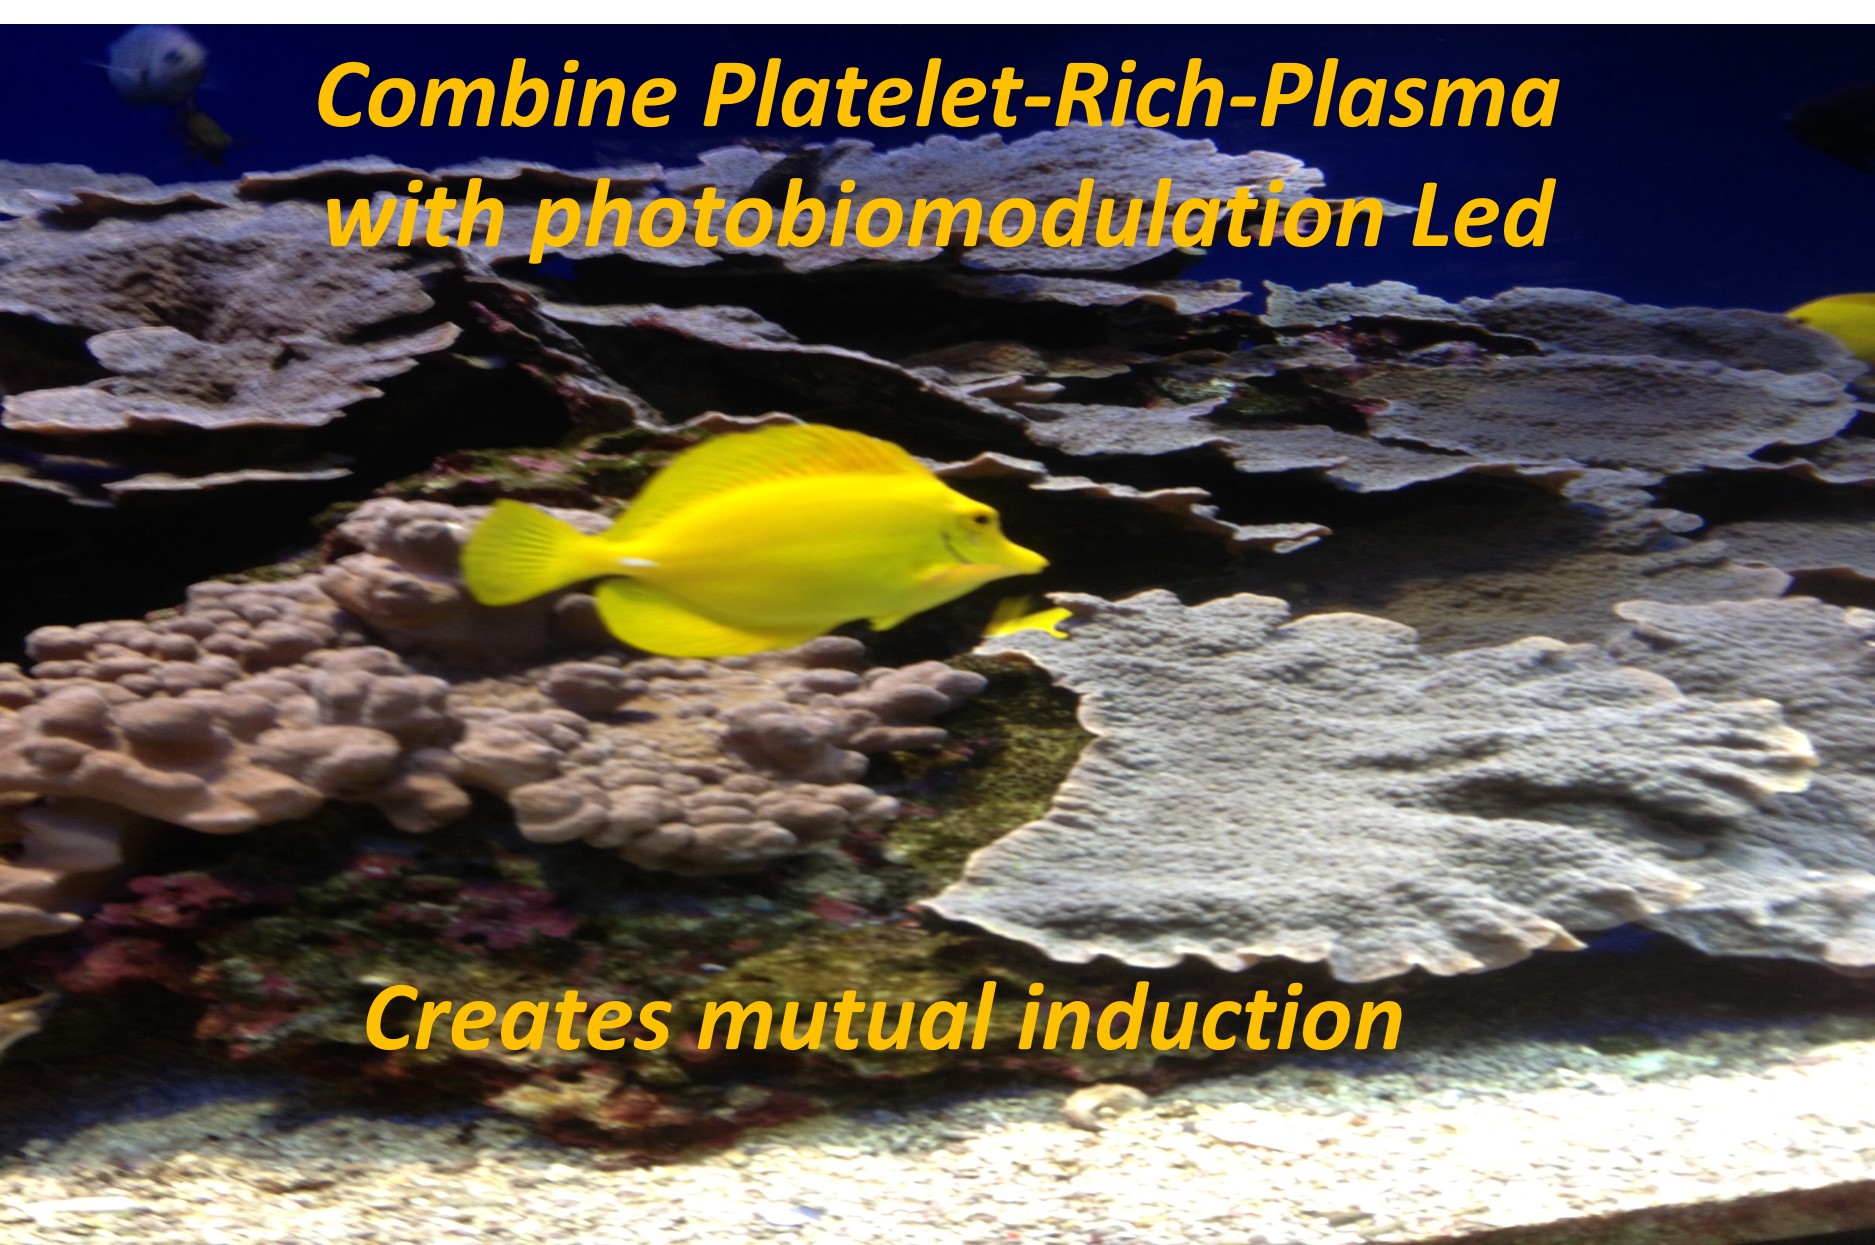 Combine Platelet-Rich-Plasma with photobiomodulation Led creates mutual induction  -   LINDA FOUQUE MD